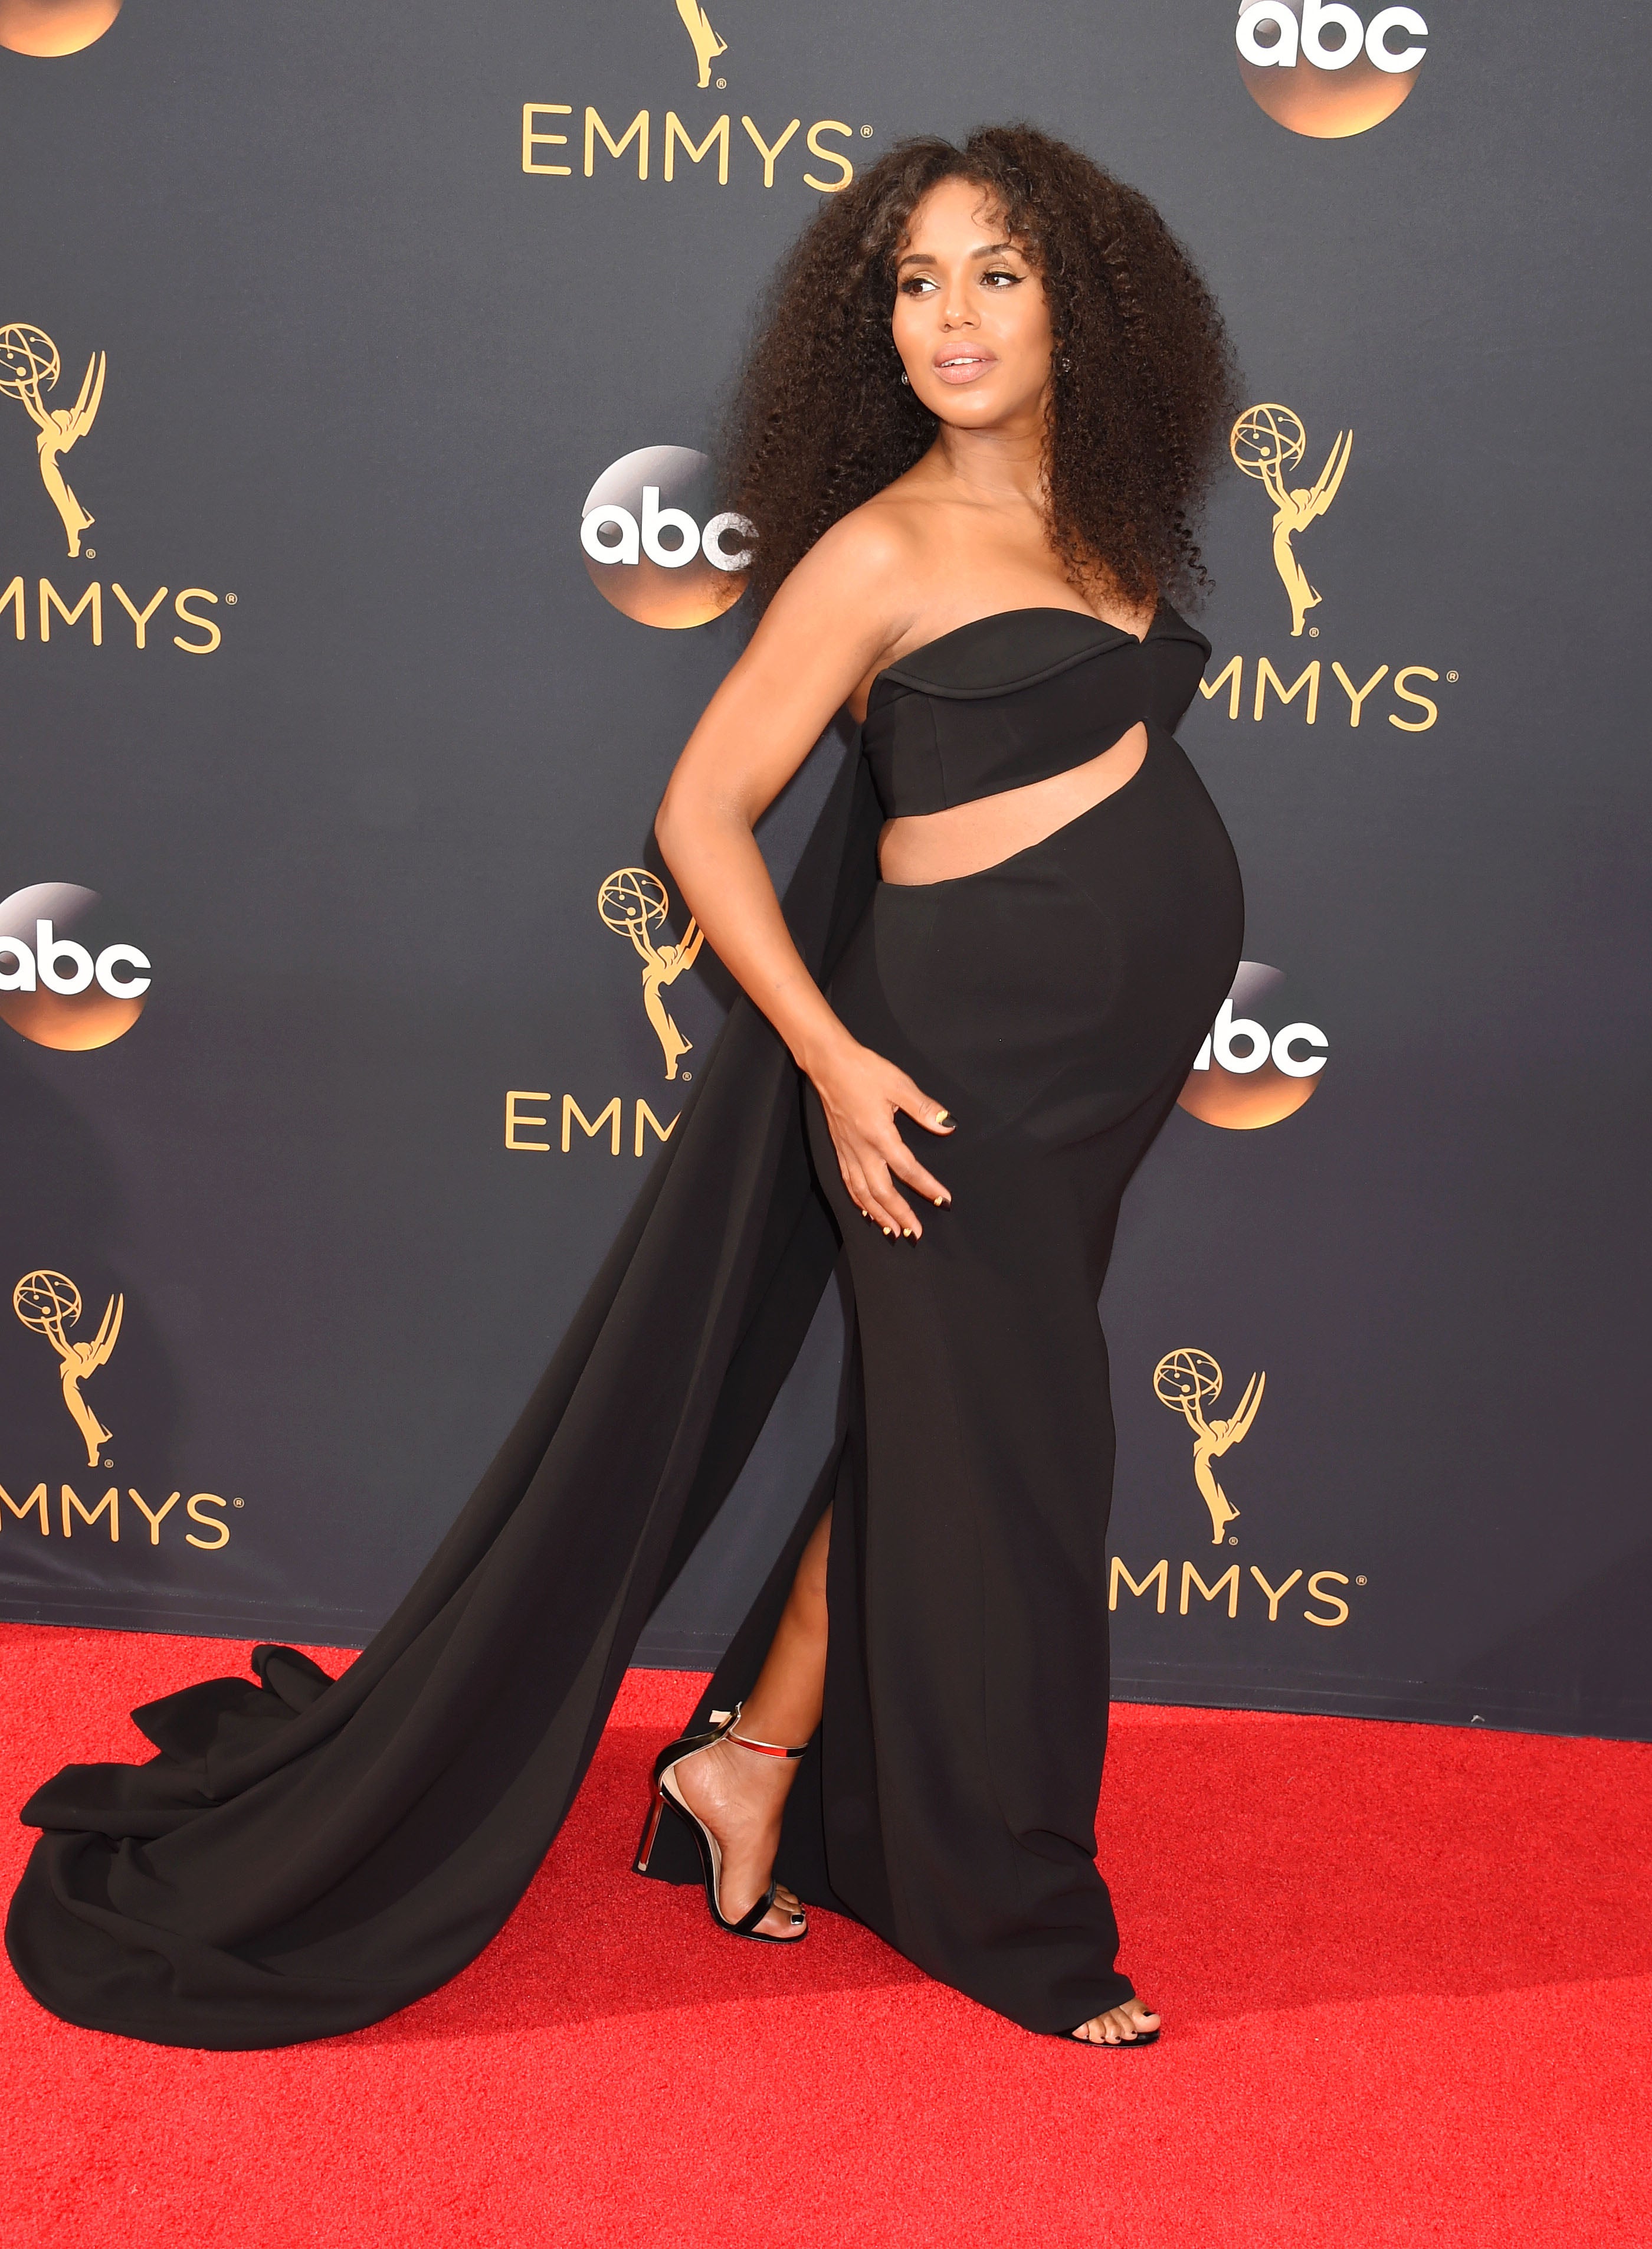 12 Glam Mommy-To-Be Style Moments We Can't Stop Gushing Over
